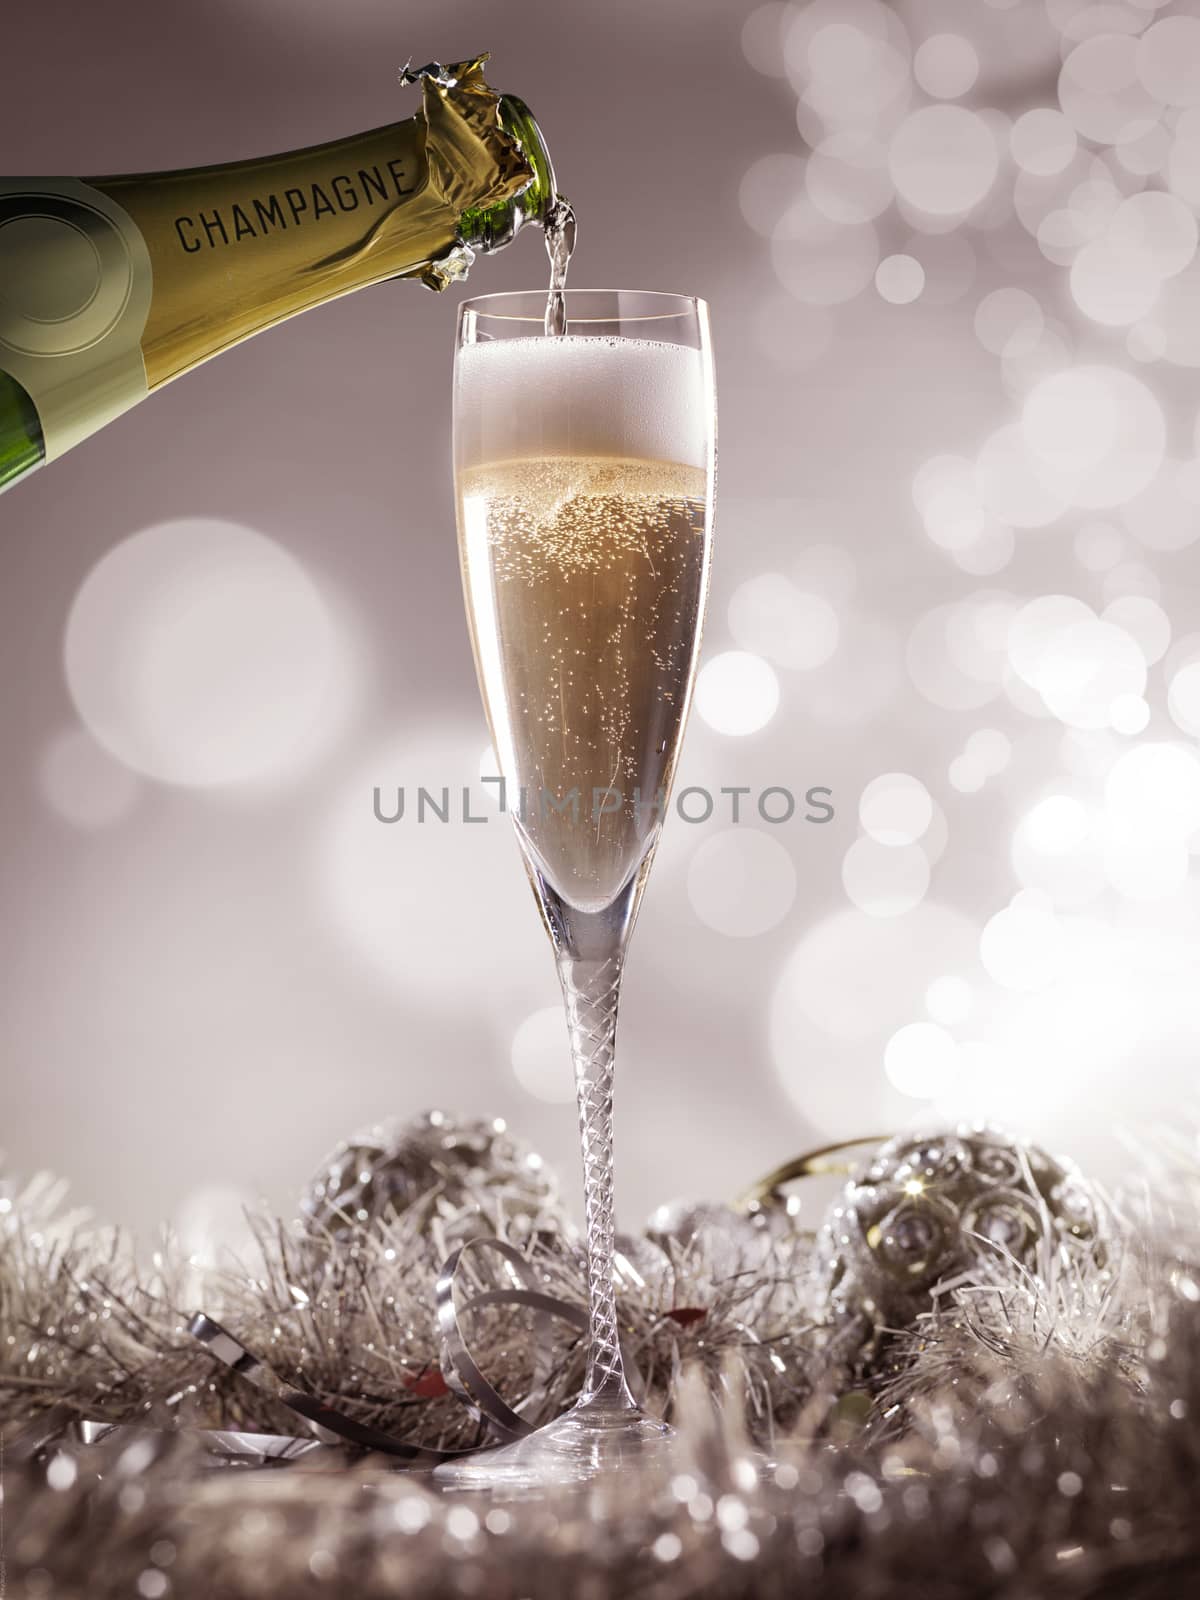 Crystal luxury champagne glass with champagne bottle and decoration